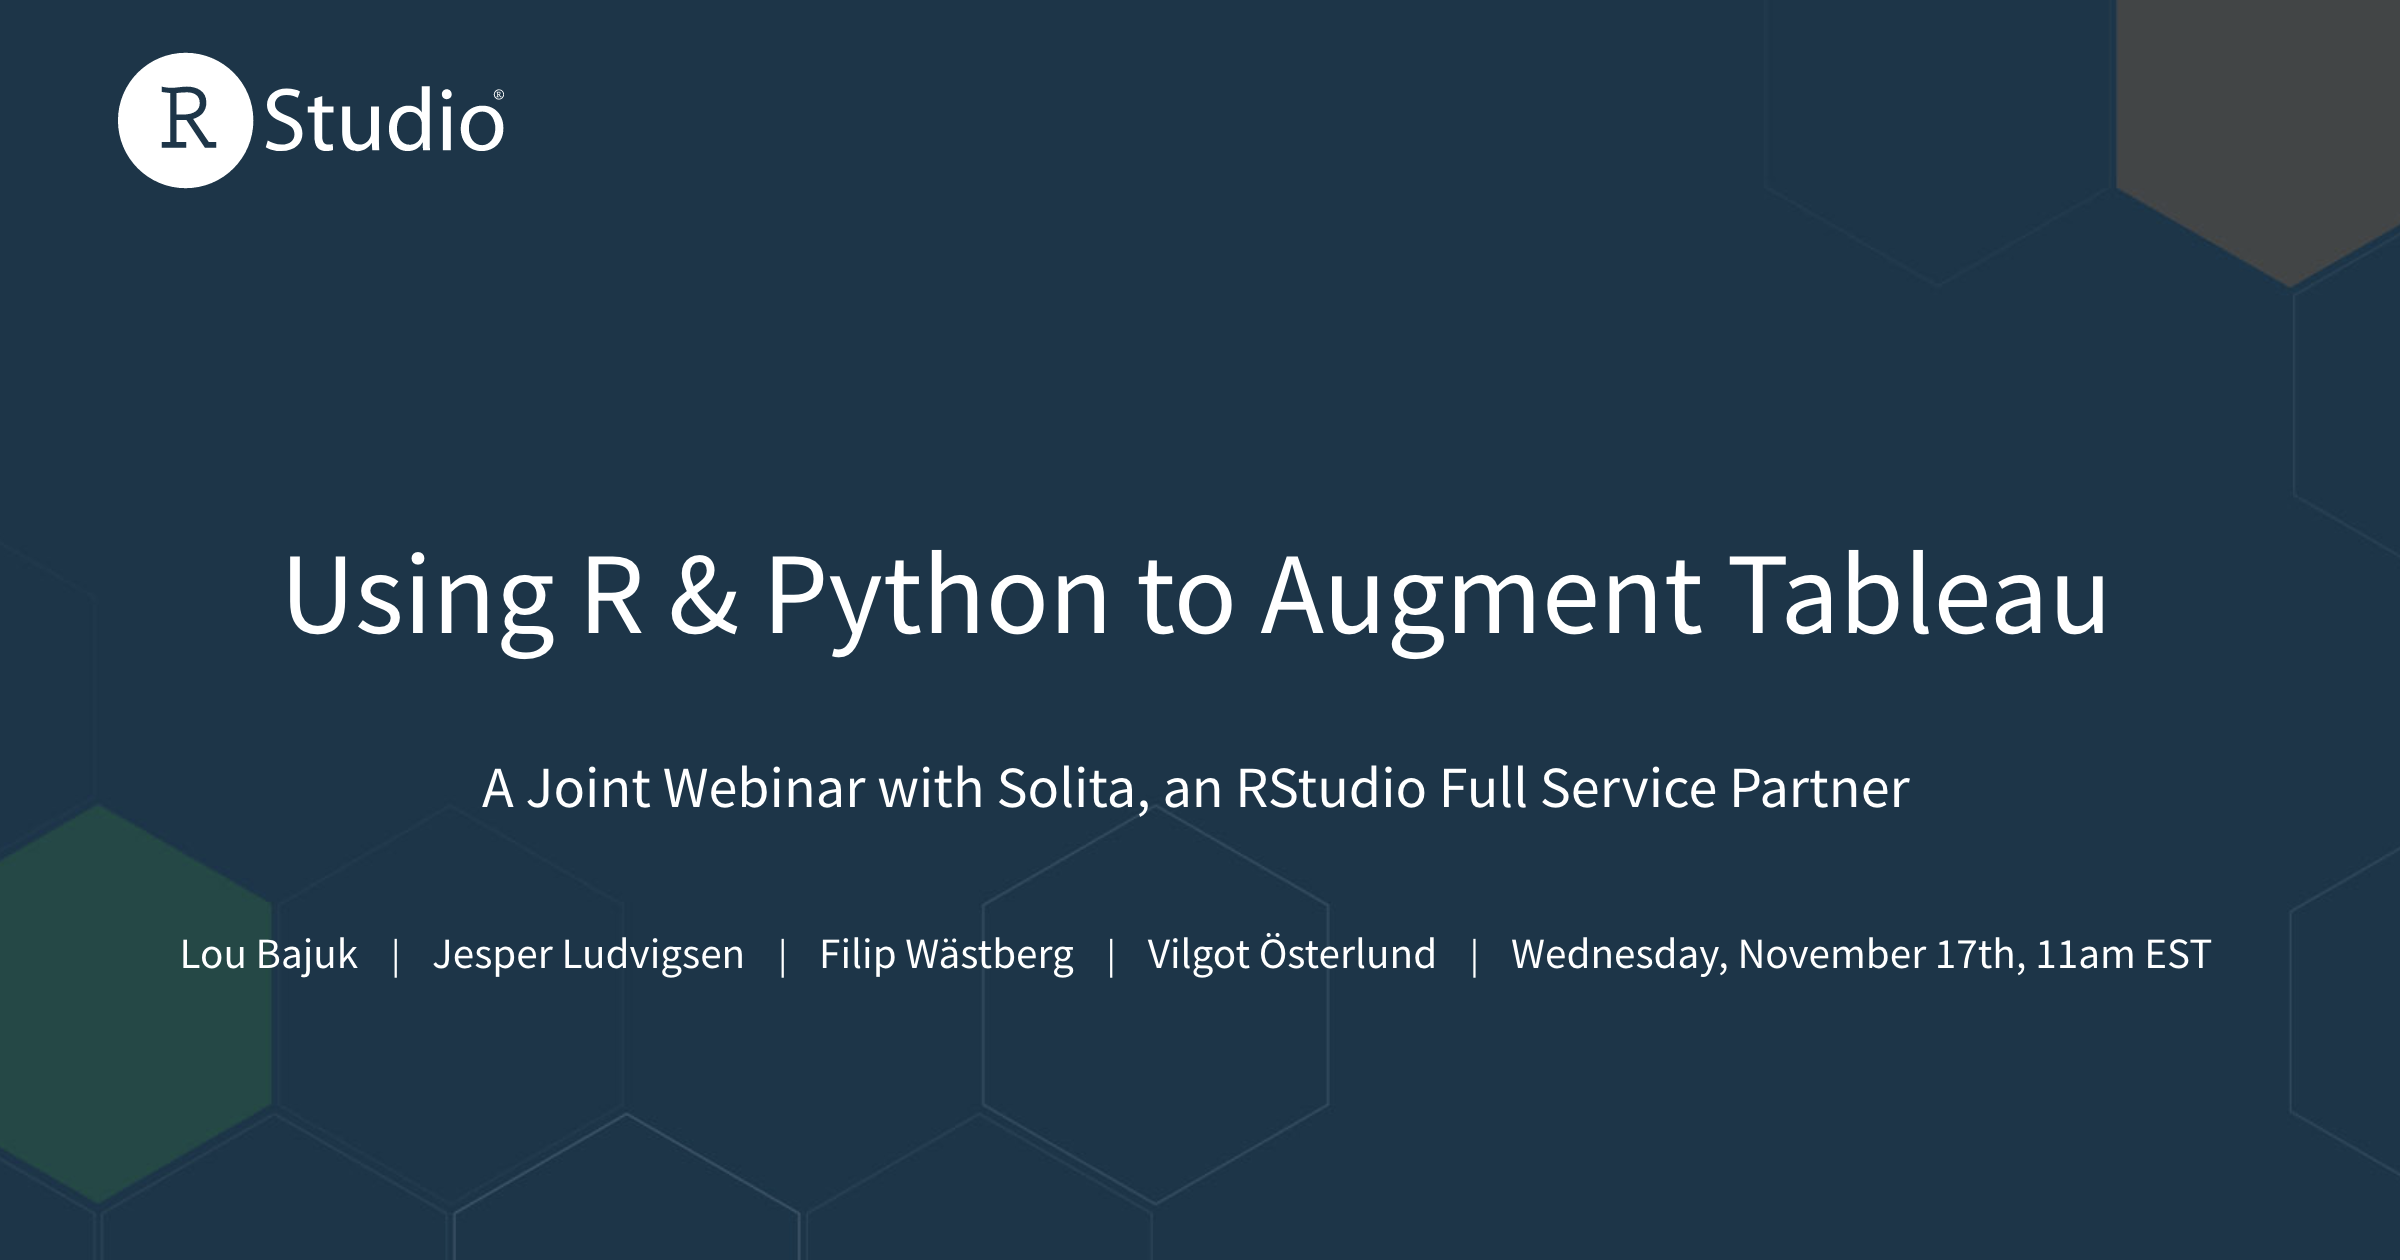 Using R & Python webinar announcement with speakers and a blue background with faded hexes